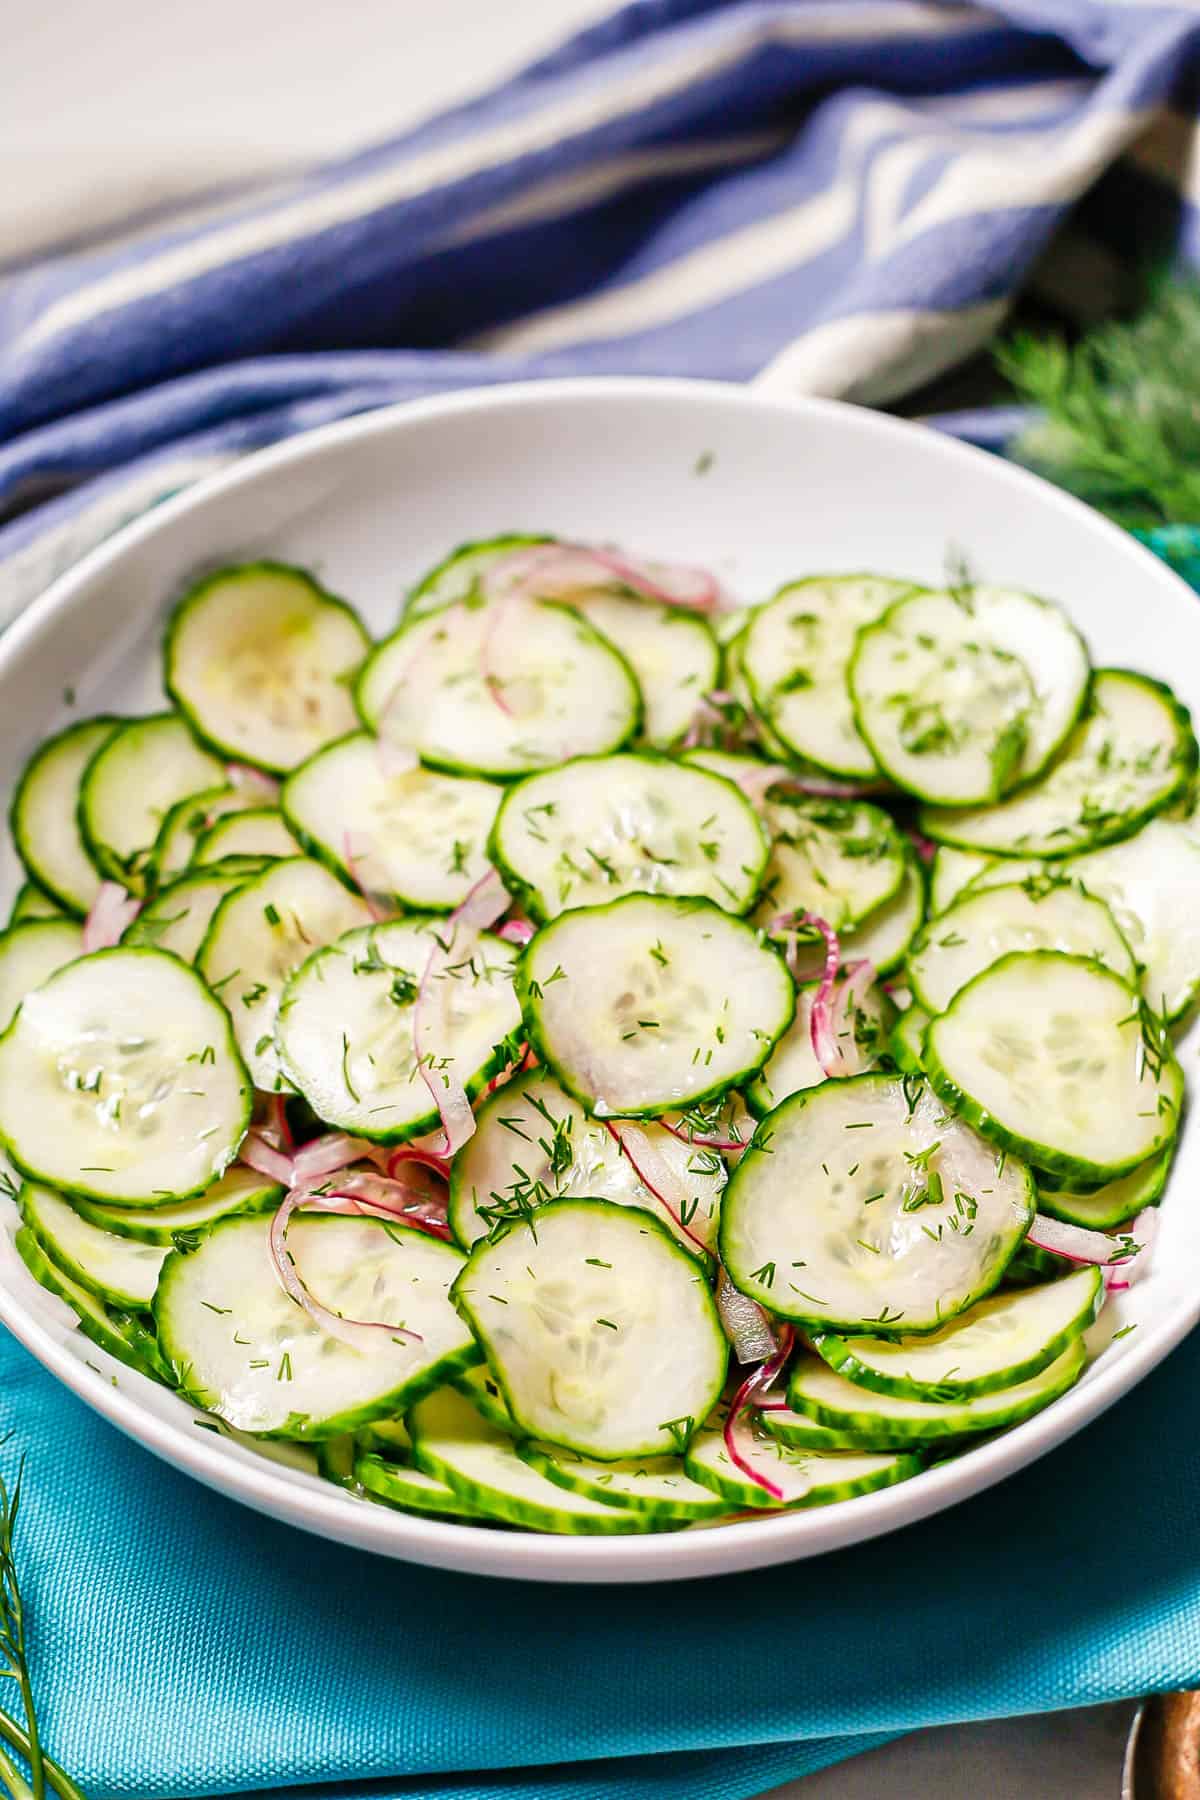 A cucumber salad in a red wine vinaigrette served in a white bowl.